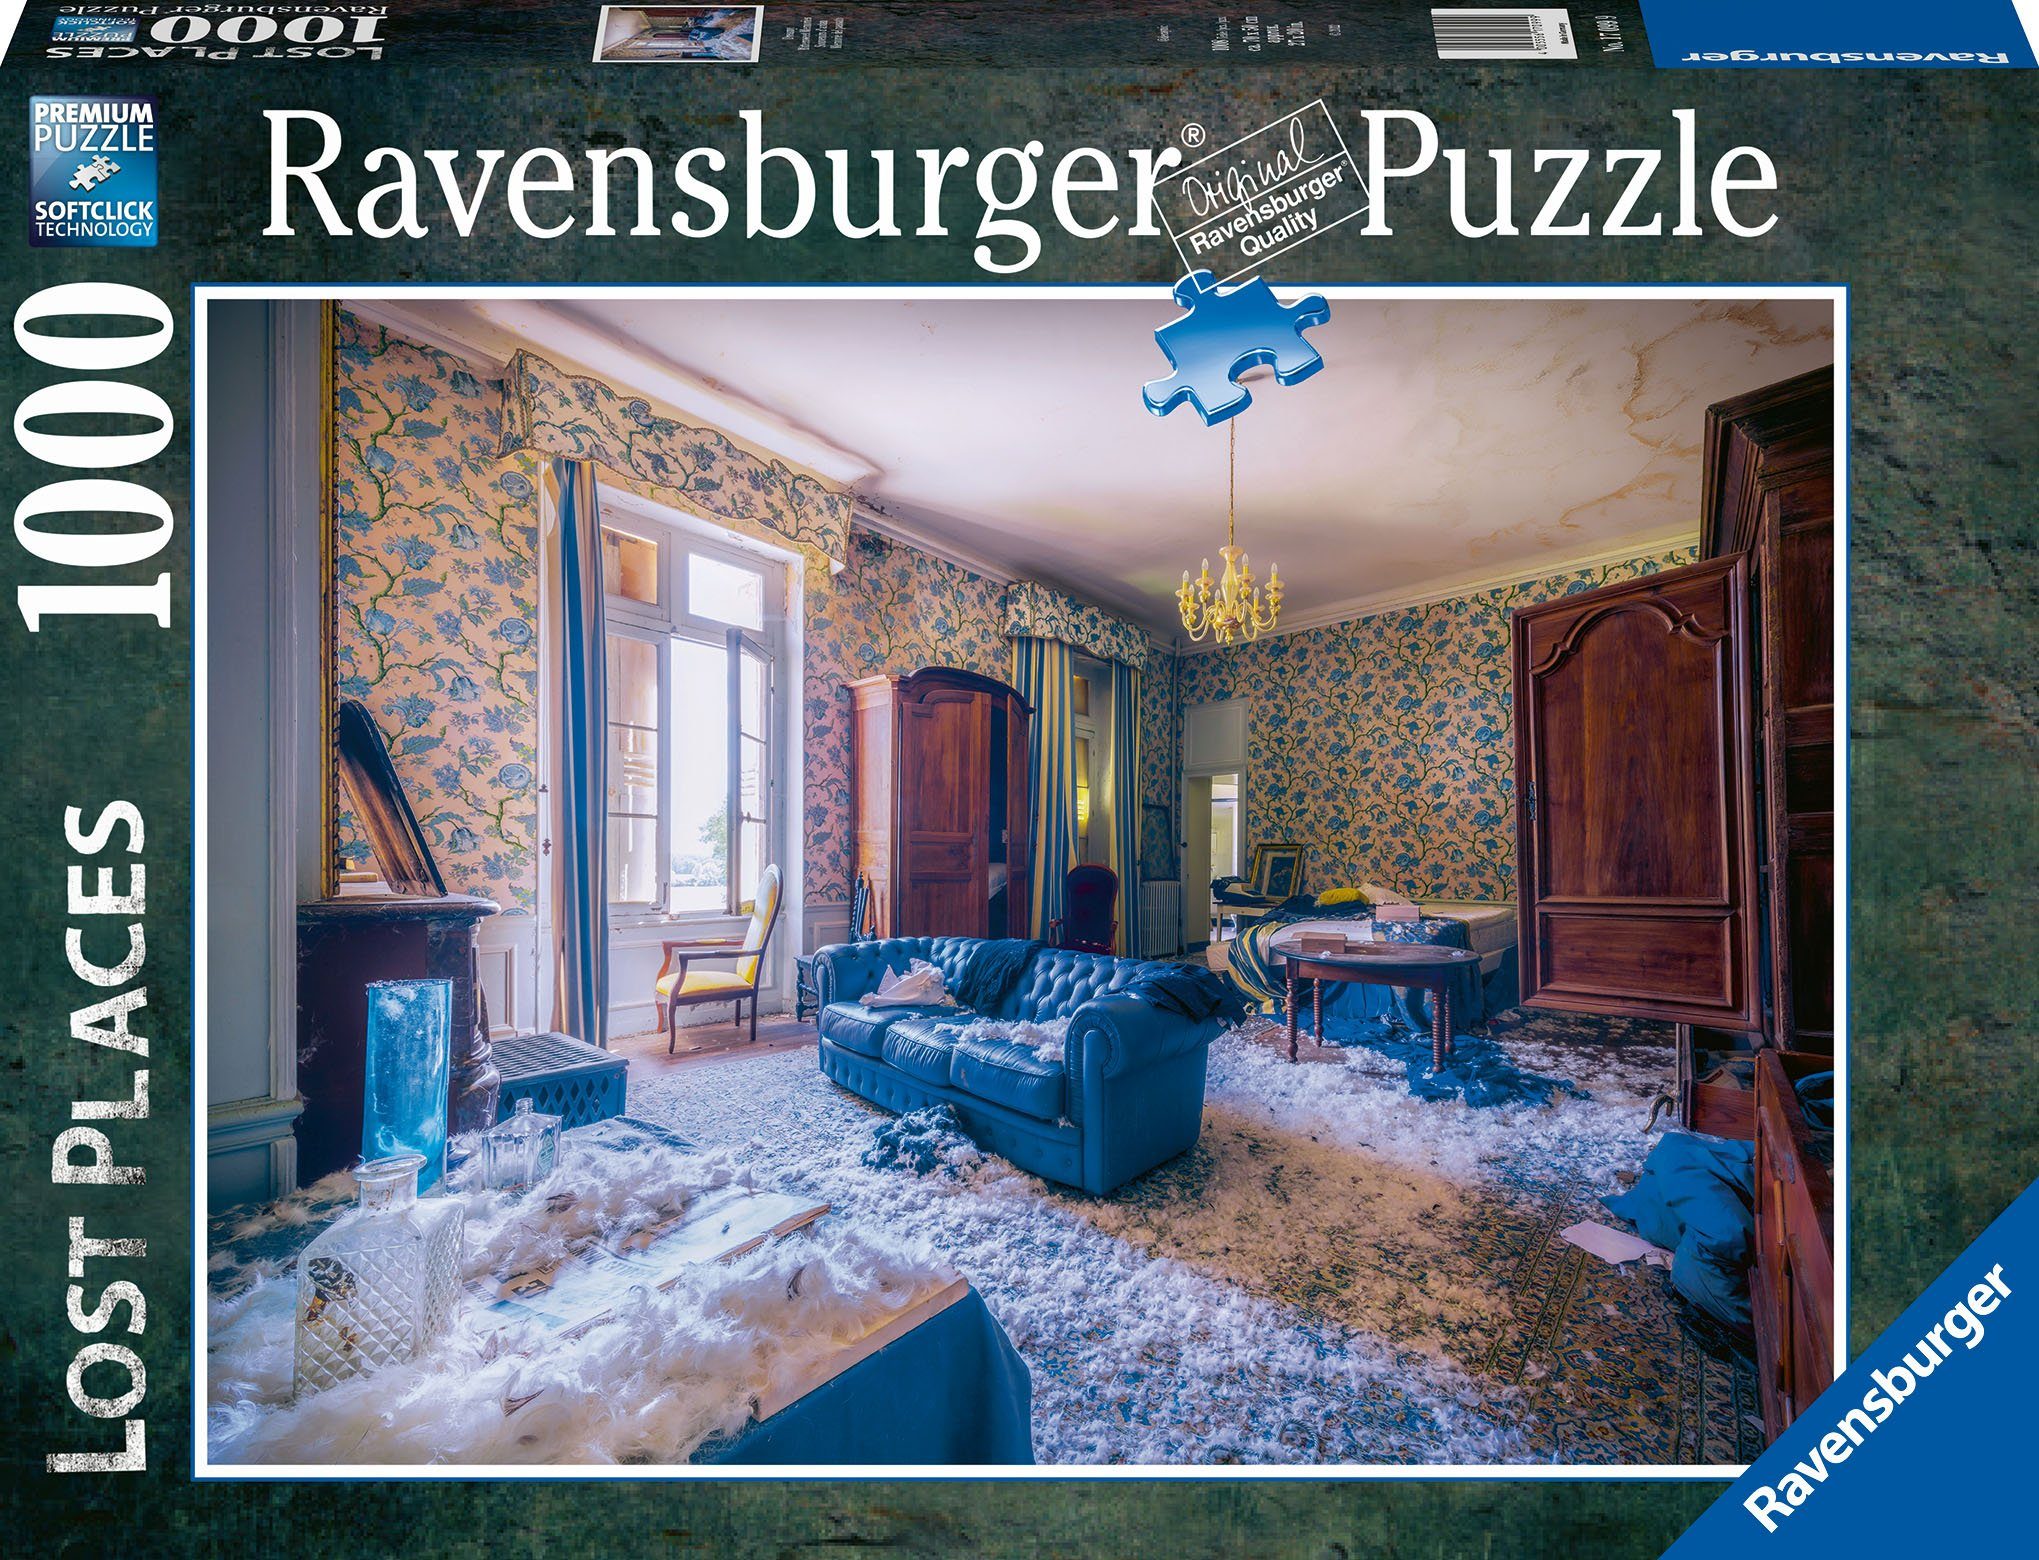 Ravensburger Puzzle Lost Places, Dreamy, 1000 Puzzleteile, Made in Germany, FSC® - schützt Wald - weltweit